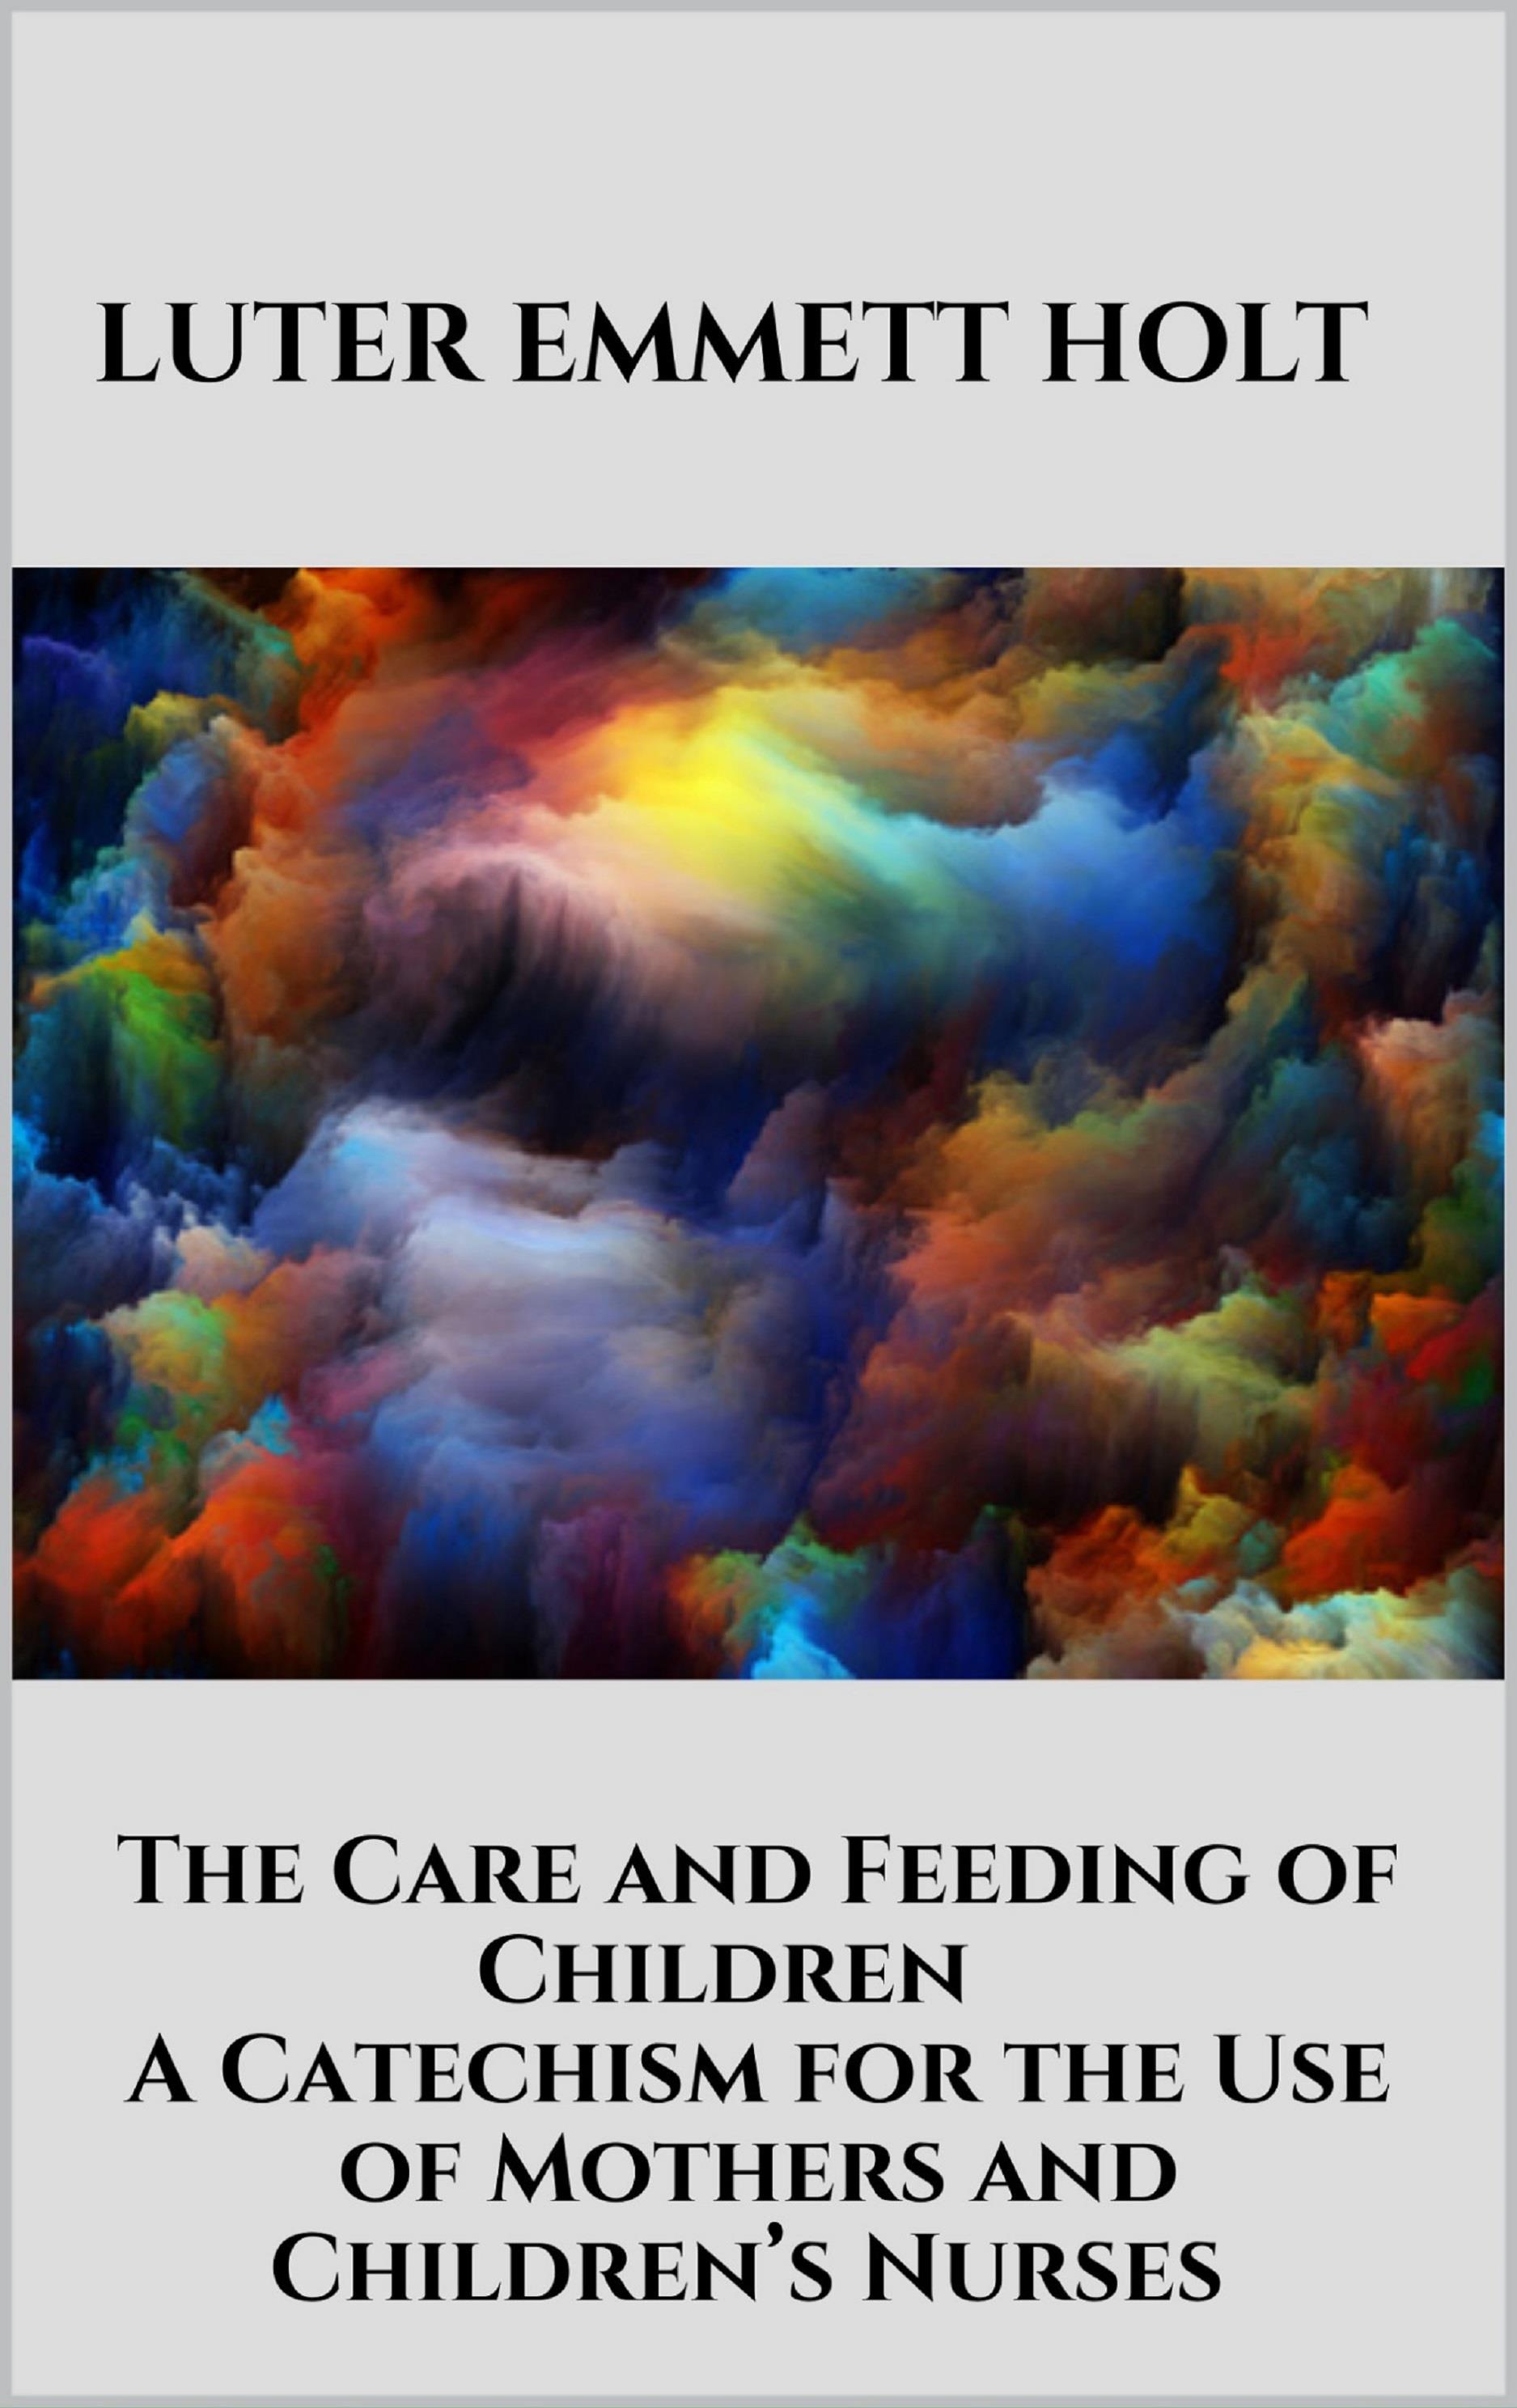 The Care and Feeding of Children -  A Catechism for the Use of Mothers and Children’s Nurses